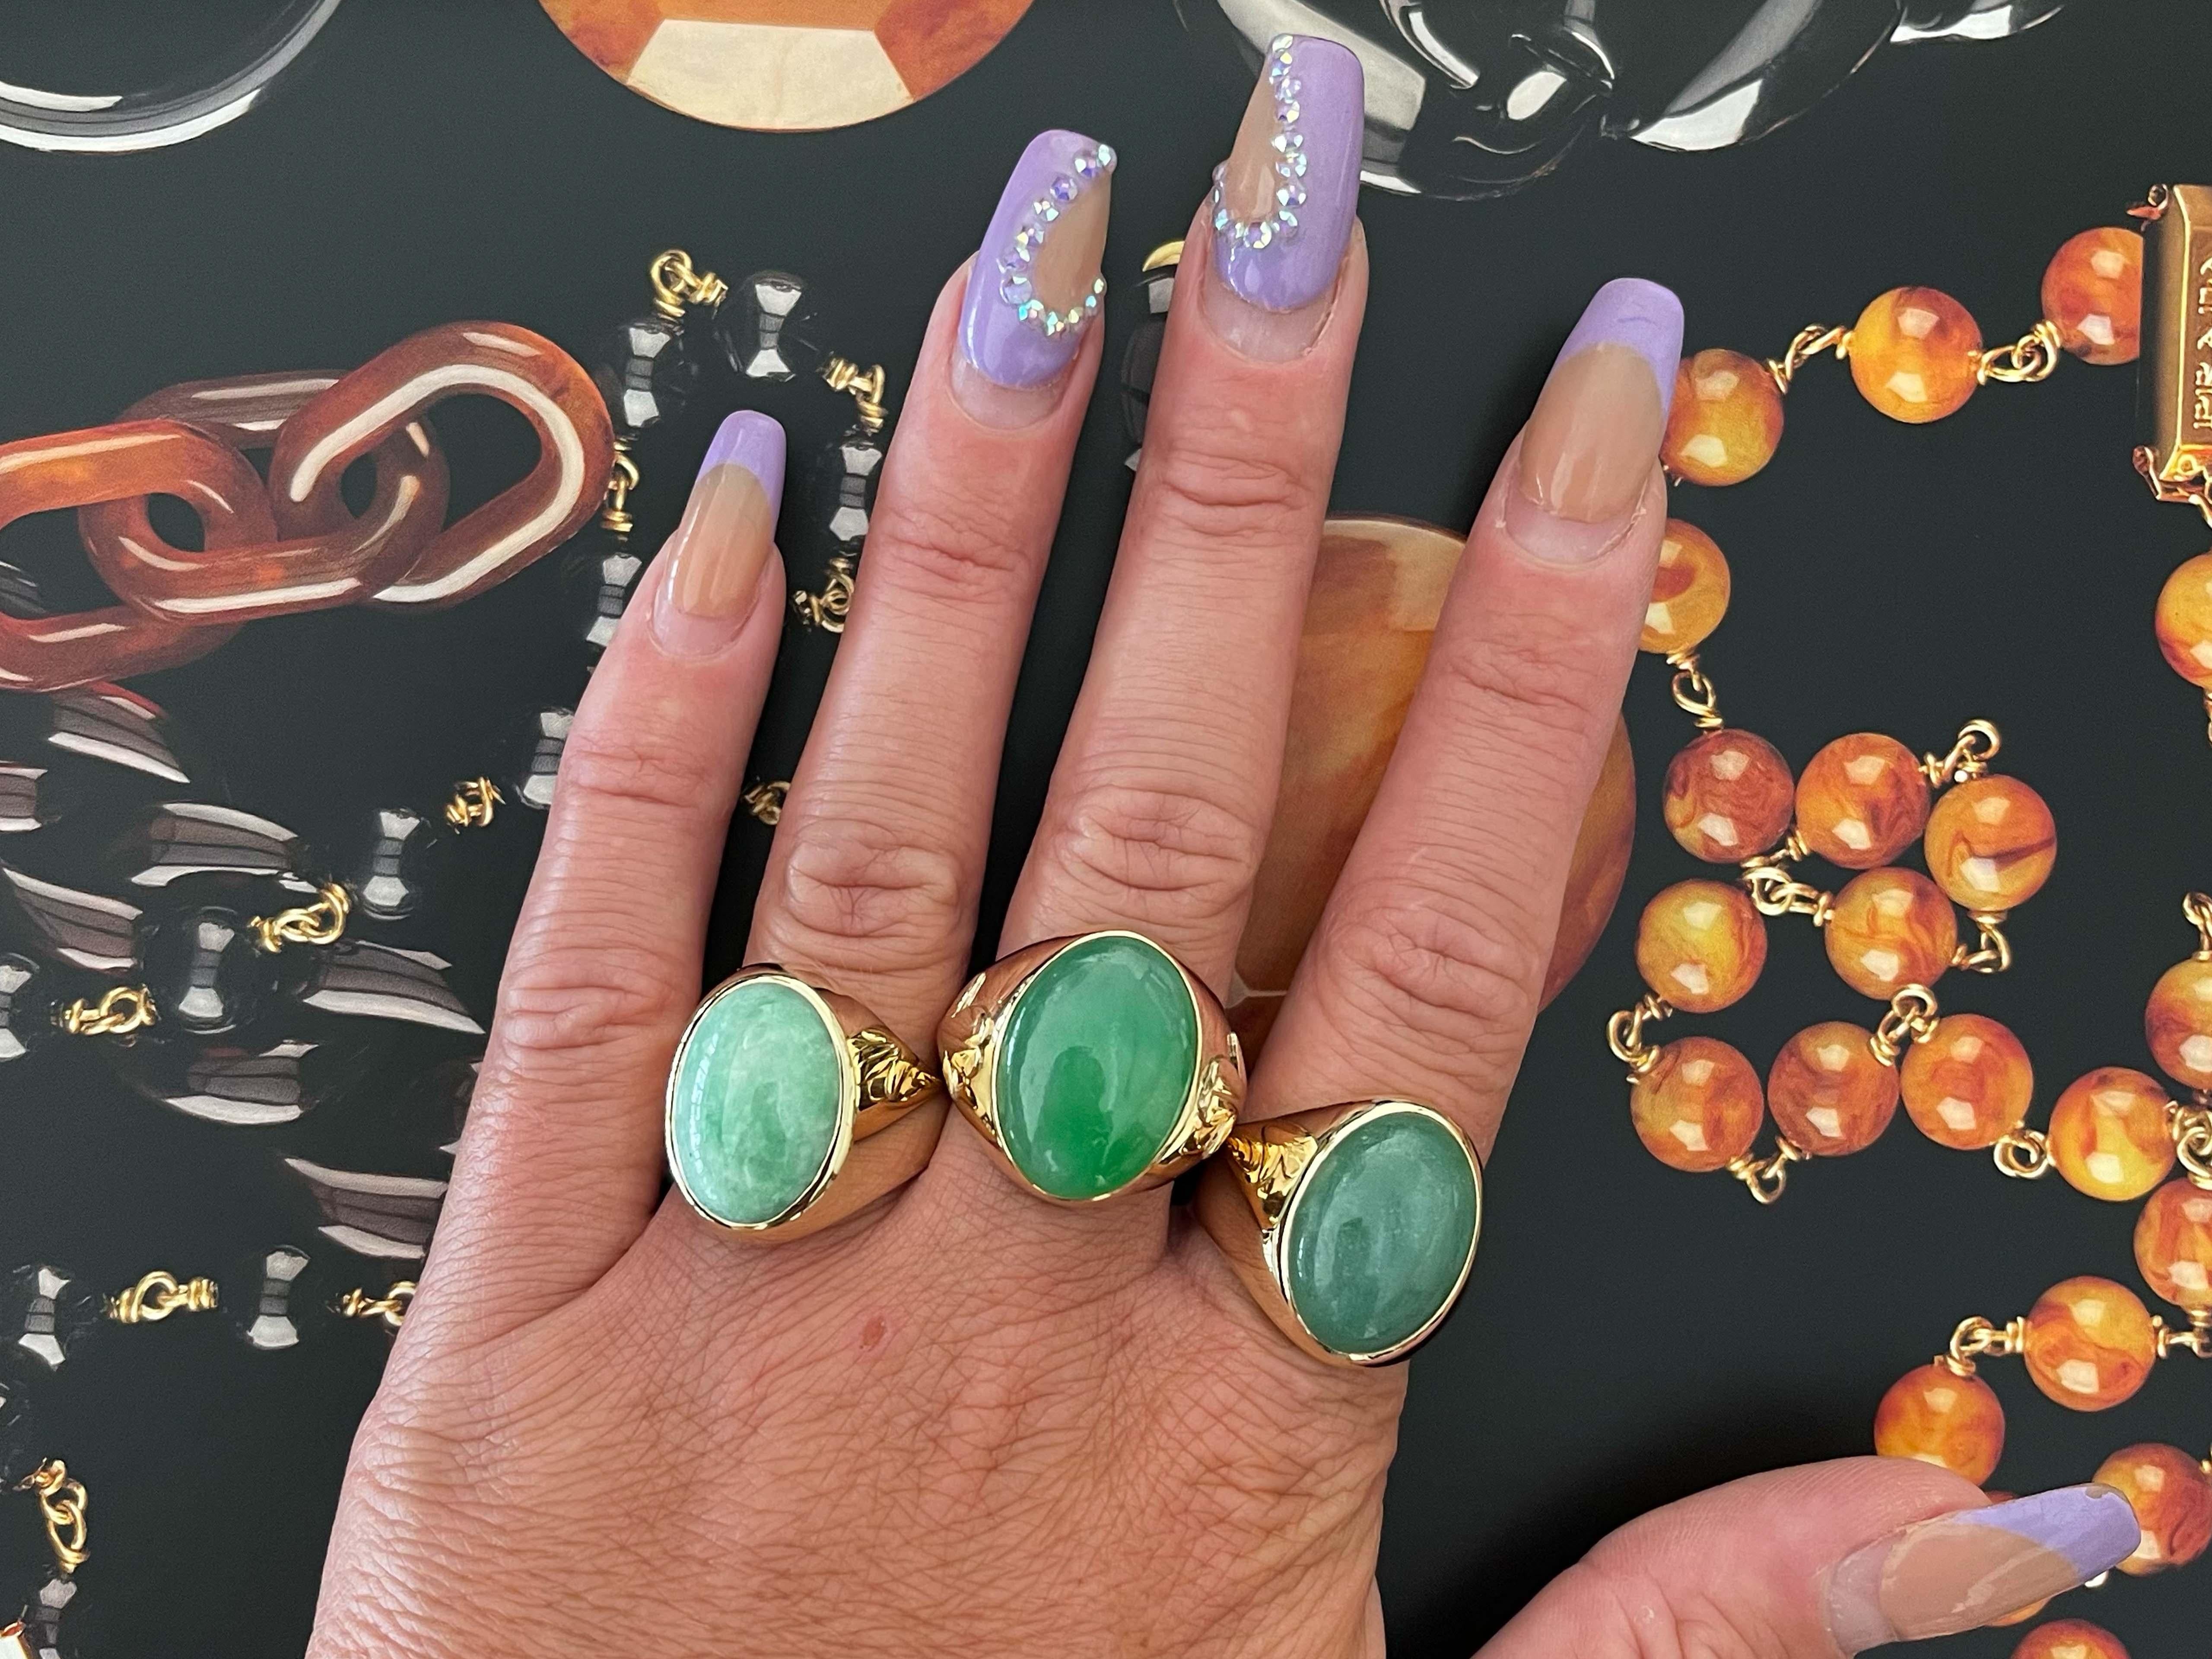 Magnificent vintage oval cabochon green jadeite jade ring, in 14k yellow gold. The beautiful apple green Jade is bezel set and measures approximately 19.79 mm x 14.49 mm x 6.40 mm. The ring has a tapered shank with a high polish finish and a floral